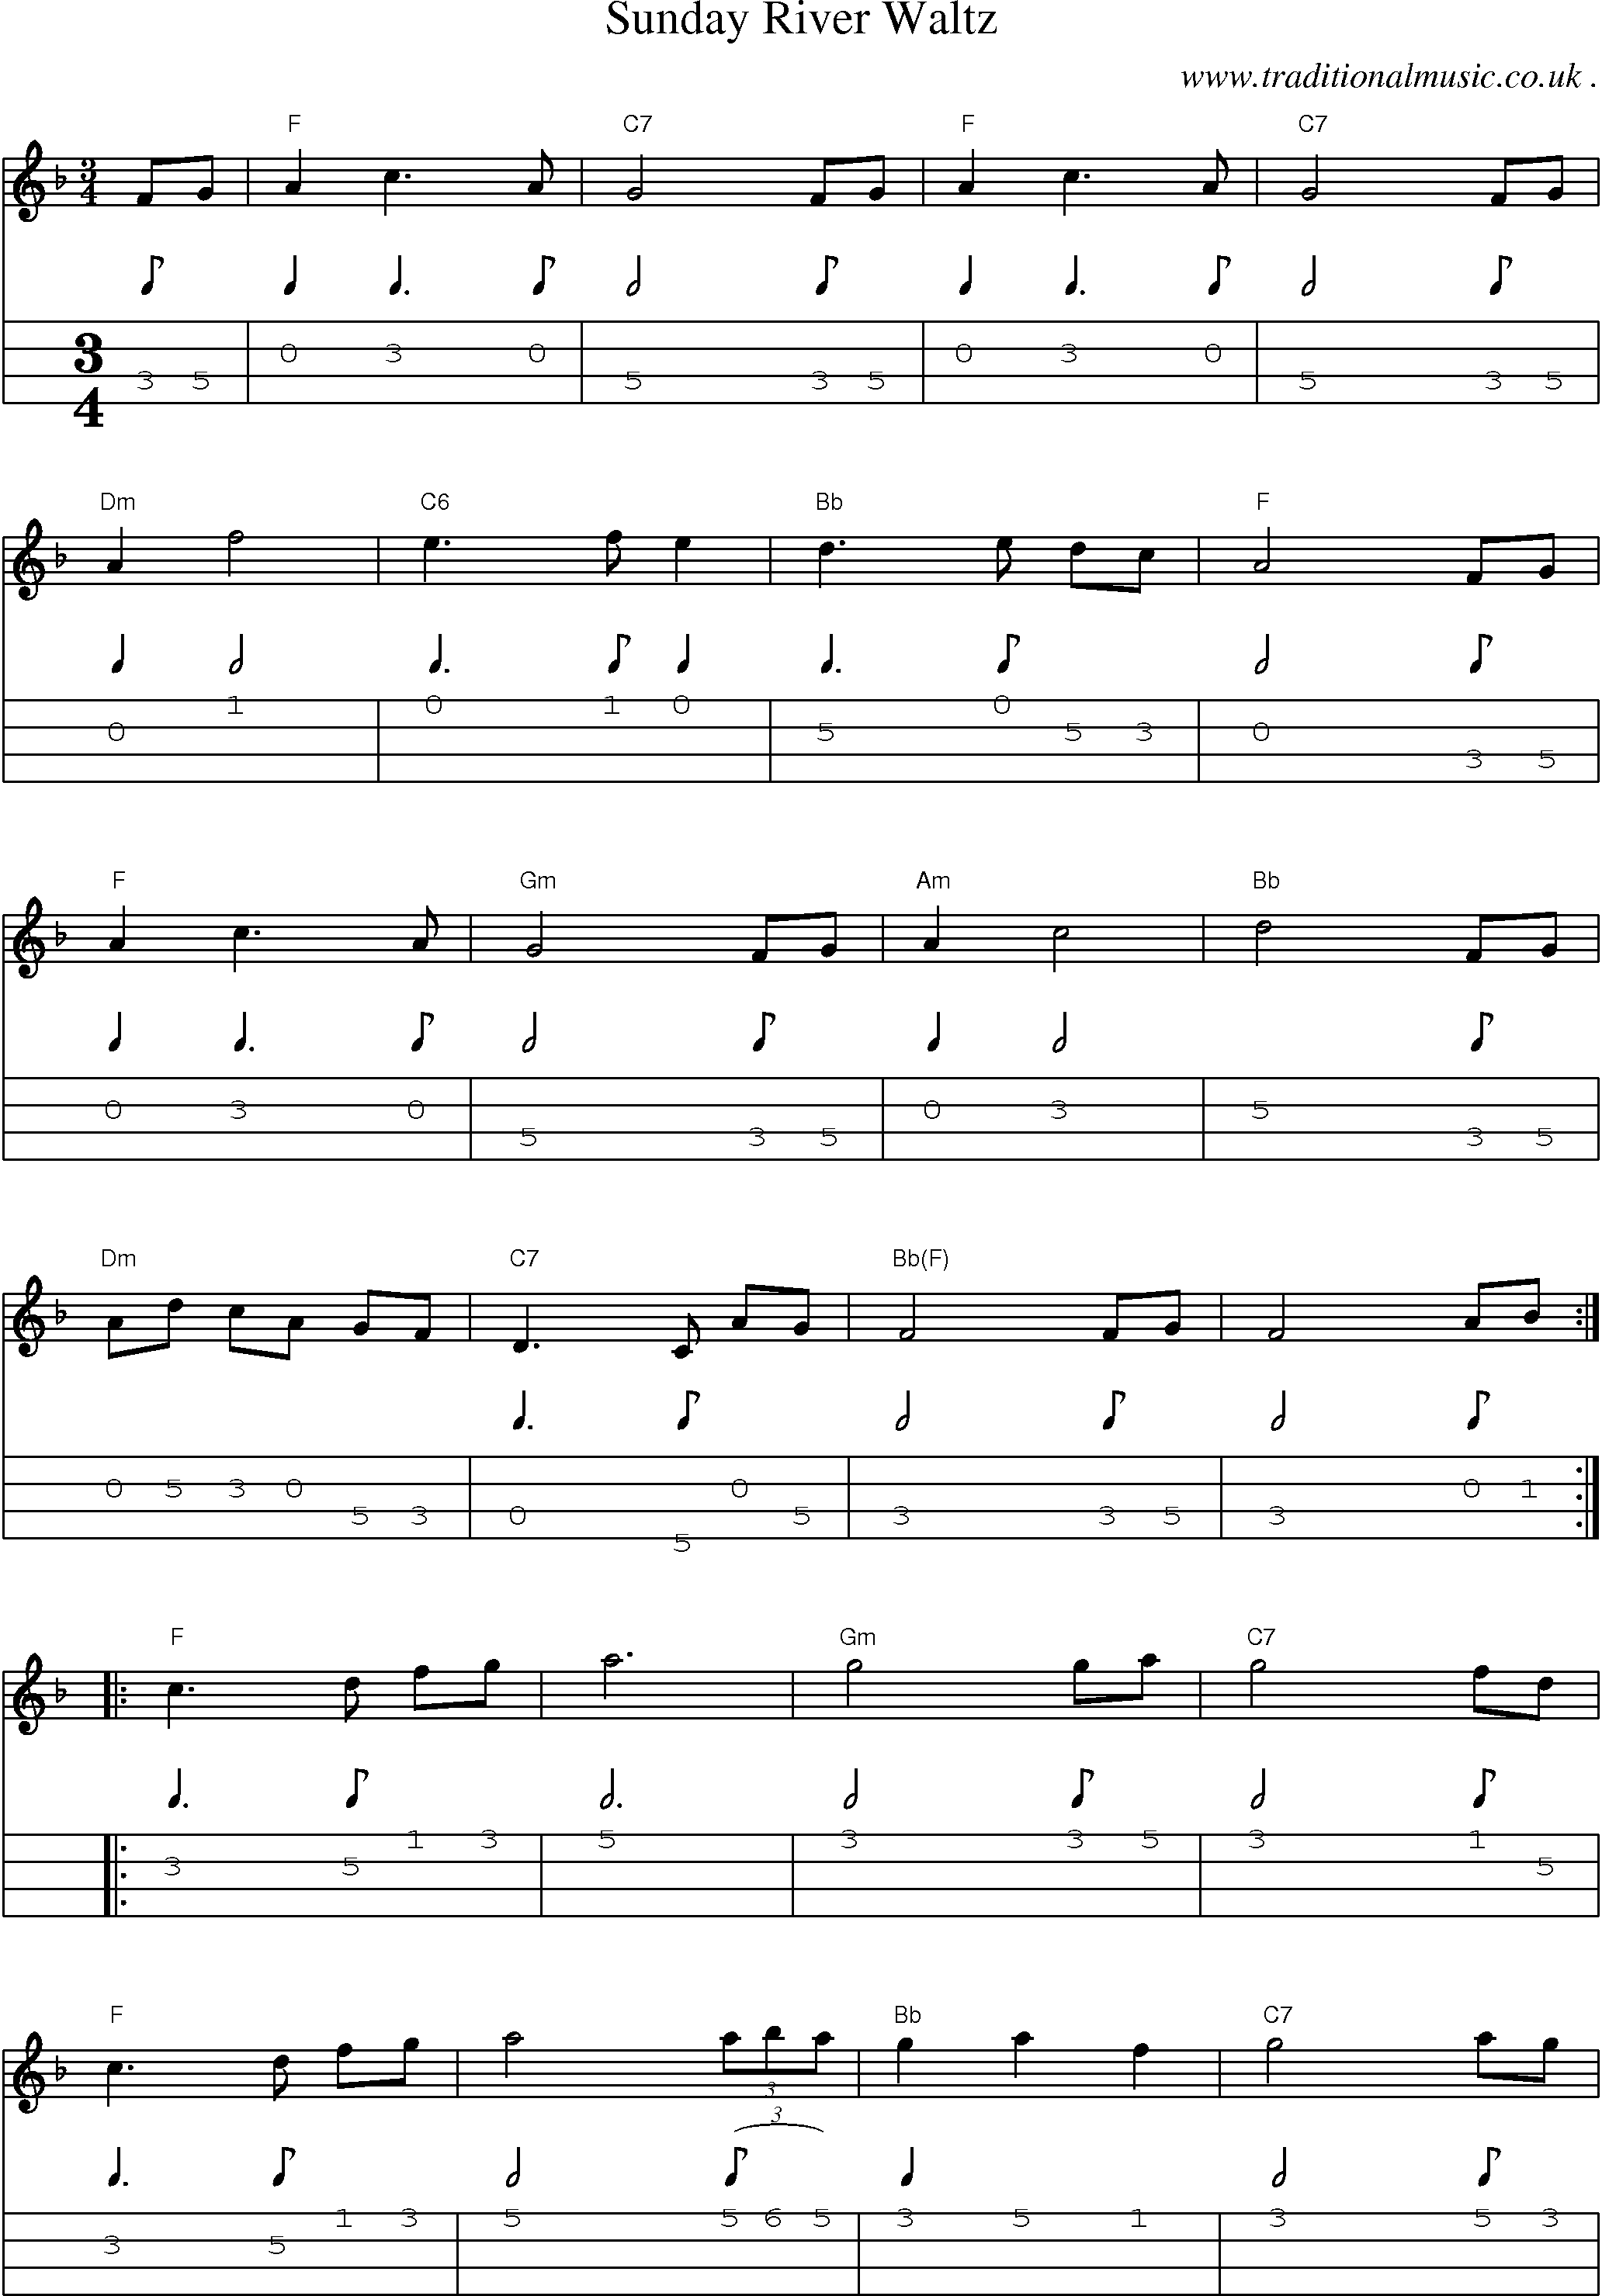 Music Score and Guitar Tabs for Sunday River Waltz